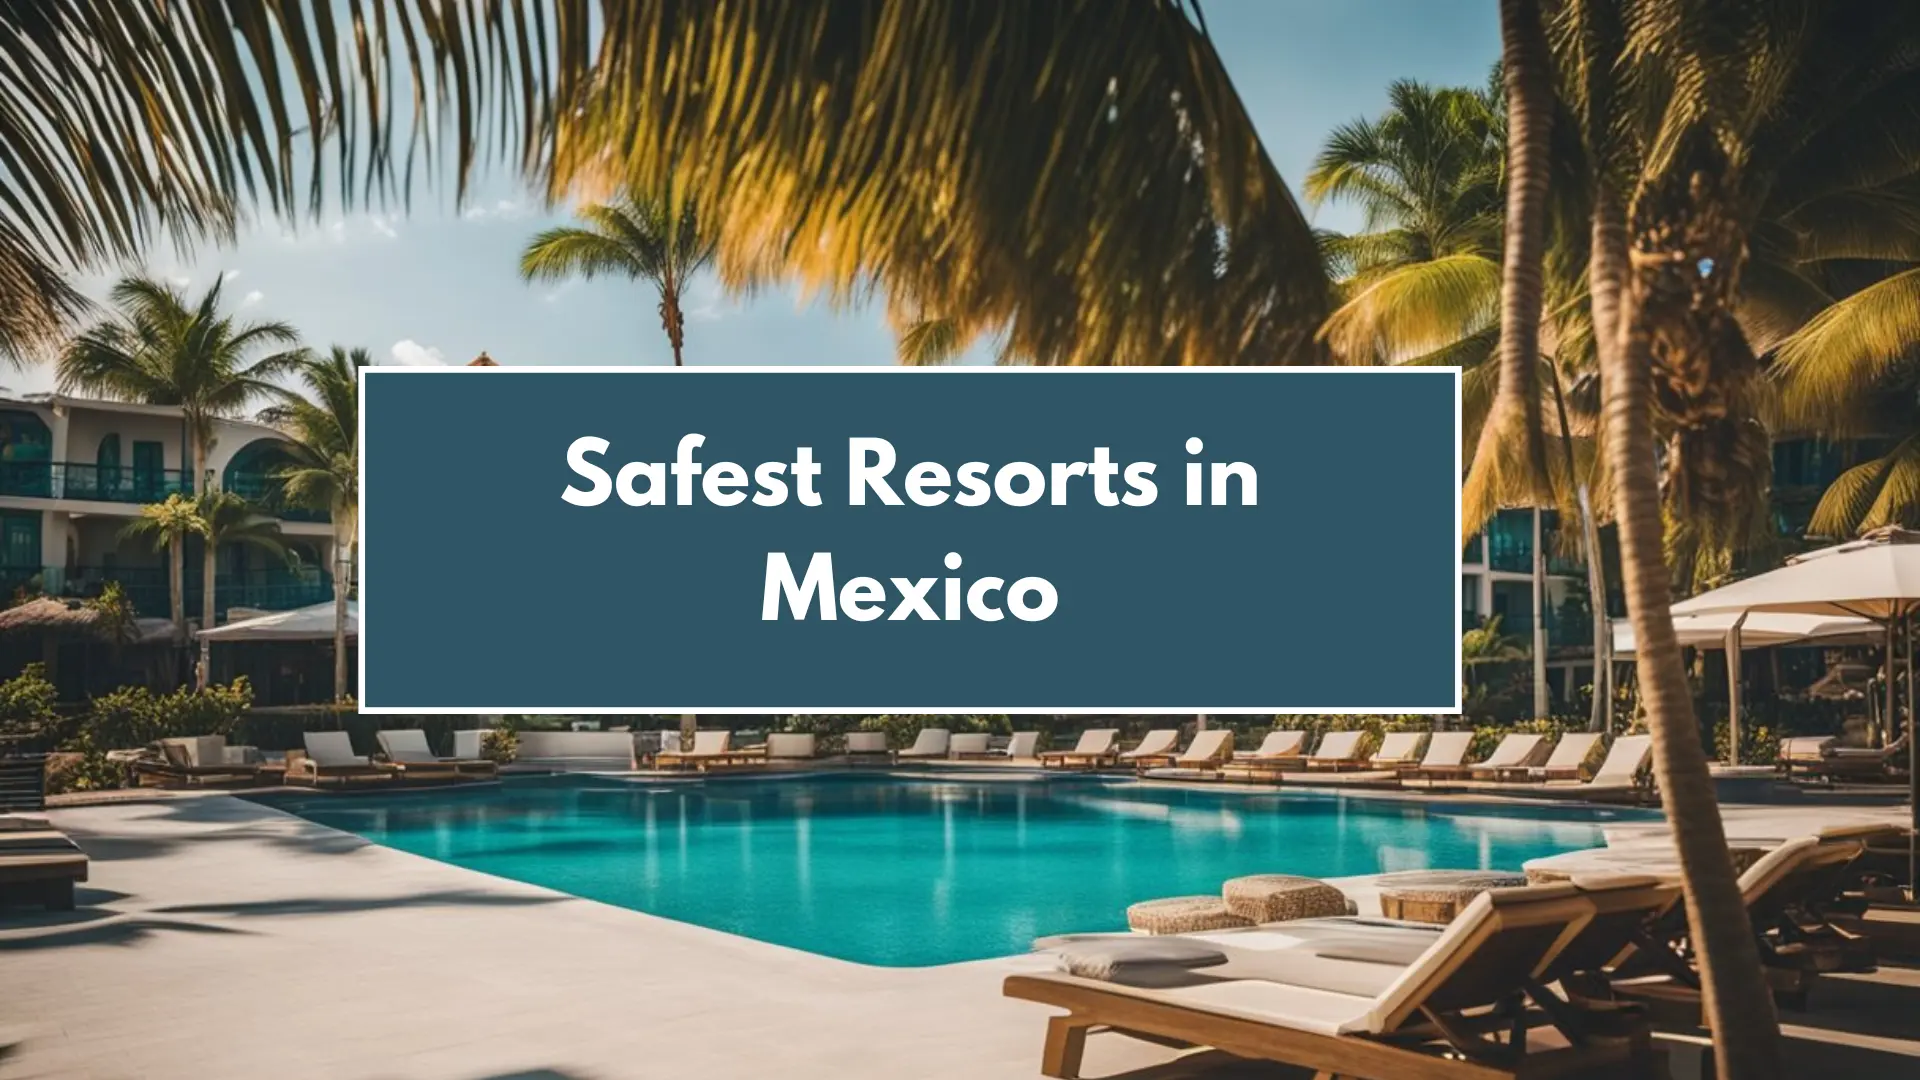 Safest Resorts in Mexico